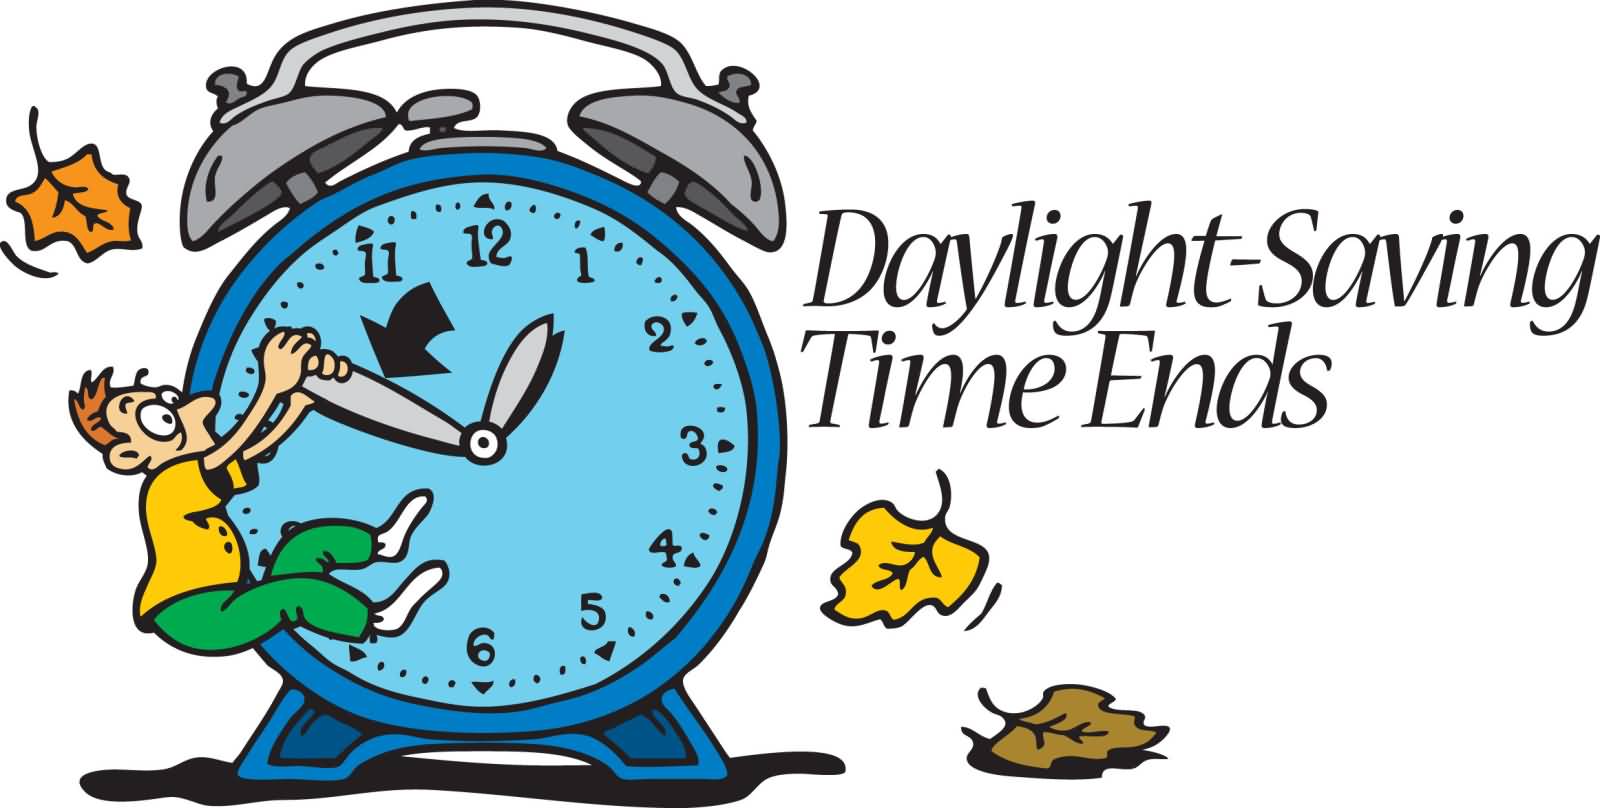 40 Best Daylight Saving Time Ends Pictures And Images